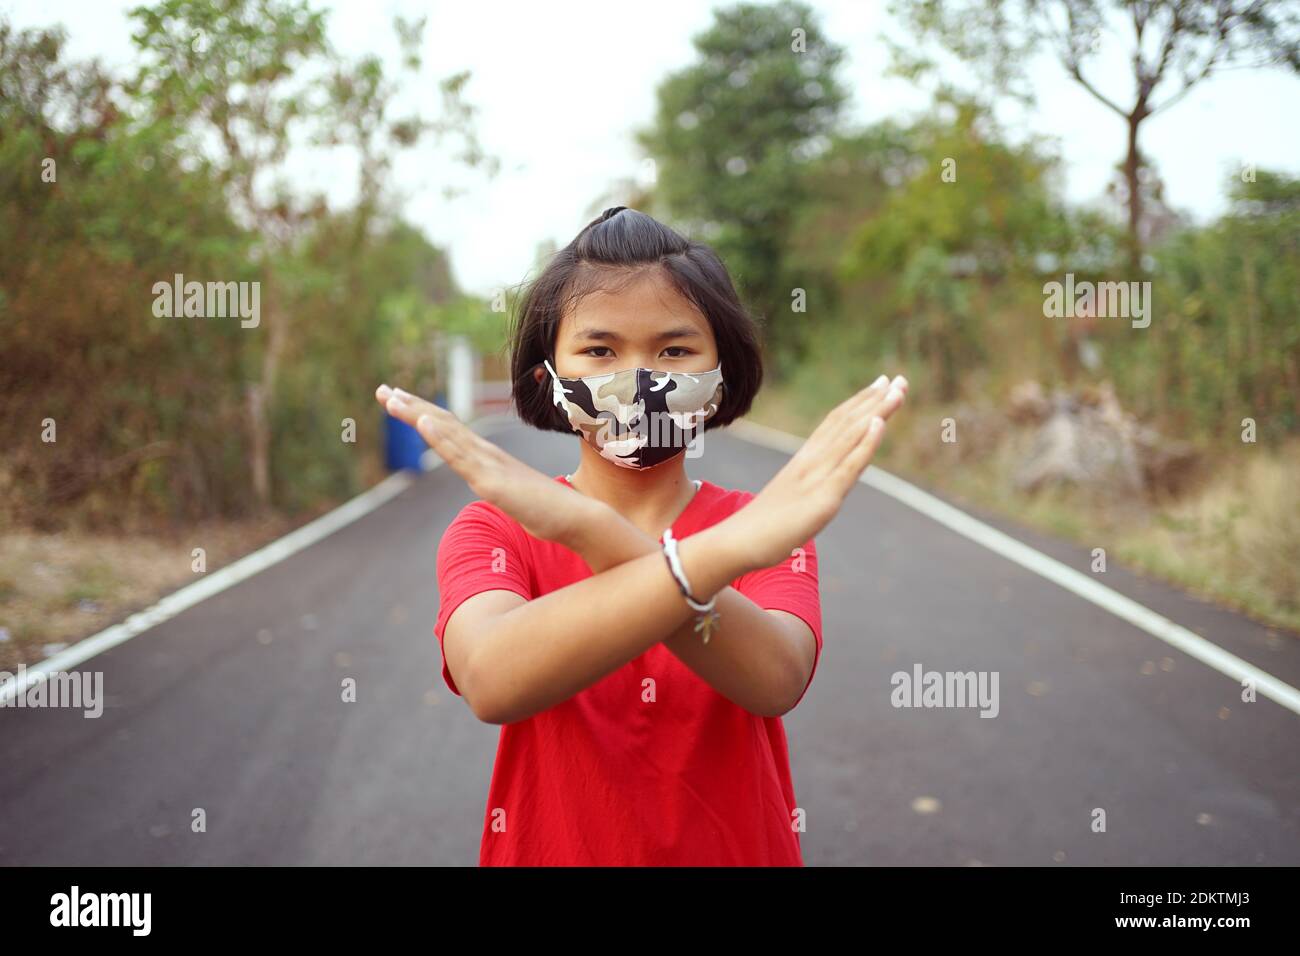 Portrait Of Girl Wearing Mask Gesturing While Standing On Road Stock Photo